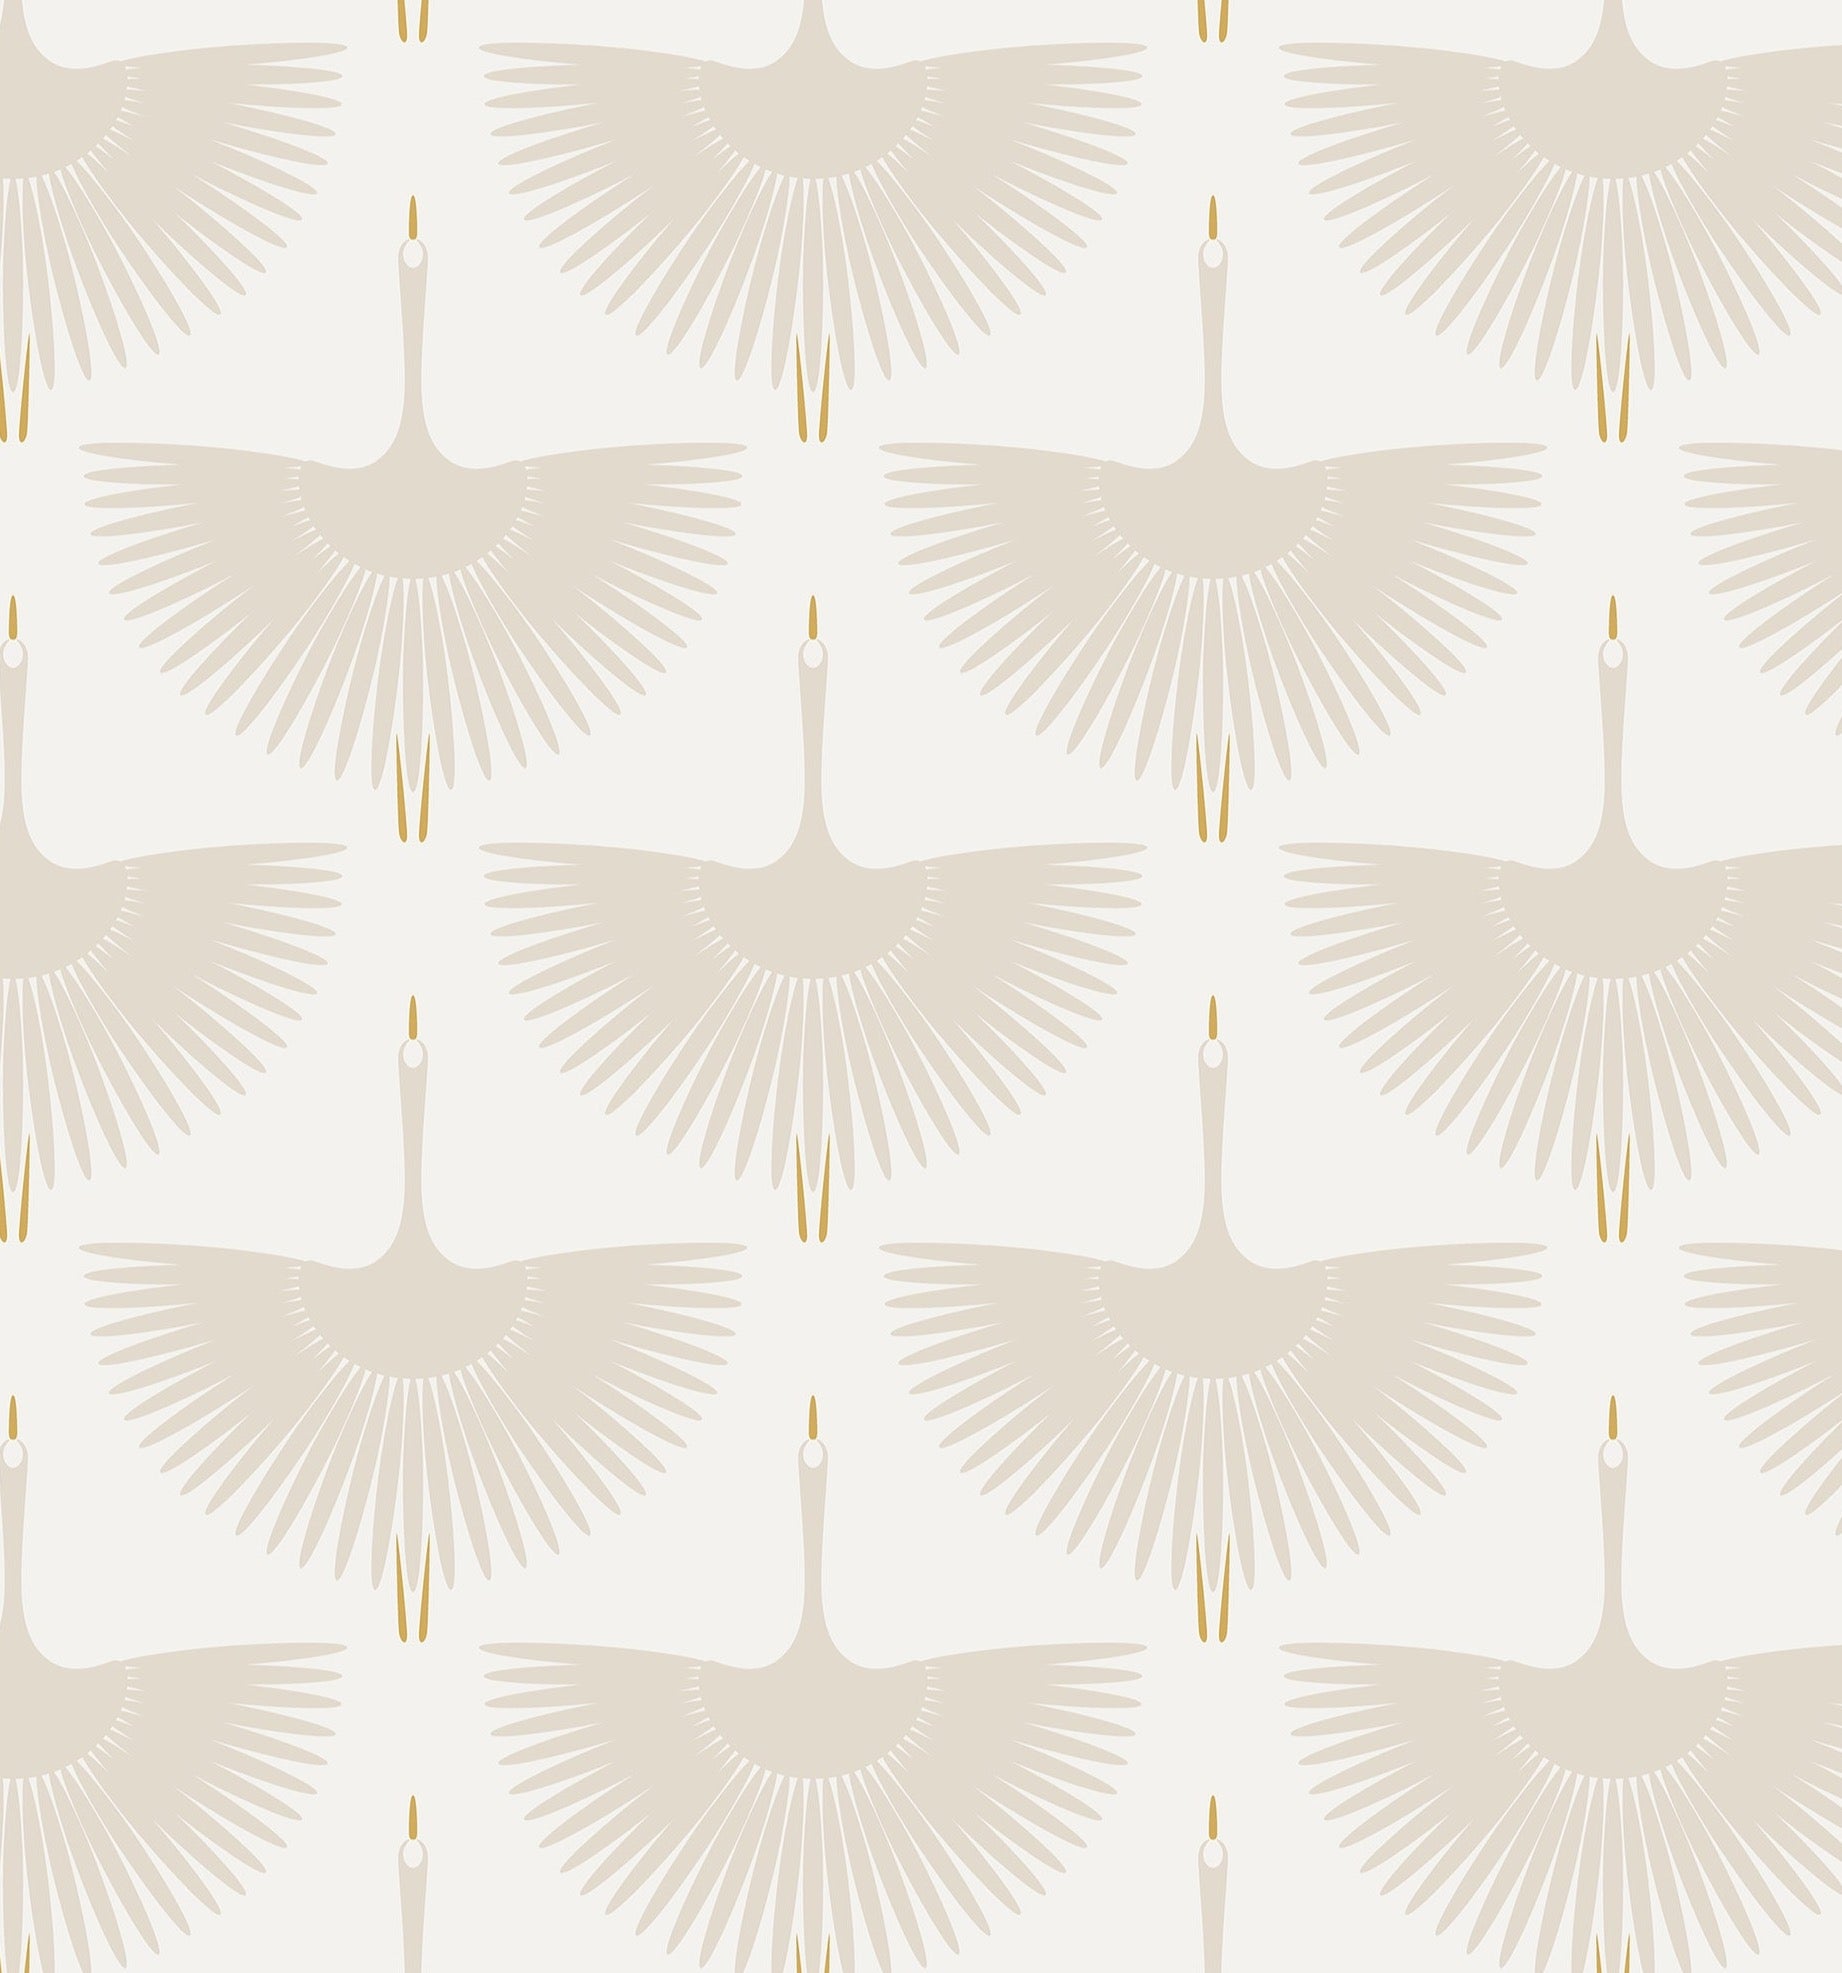 A detailed view of the "Flying Swans Wallpaper" showcasing the design up close. Each swan is intricately depicted with wide, spread wings in a soothing beige tone, accented with gold beaks, set against a light neutral background. This pattern brings a sophisticated and peaceful charm to any space.